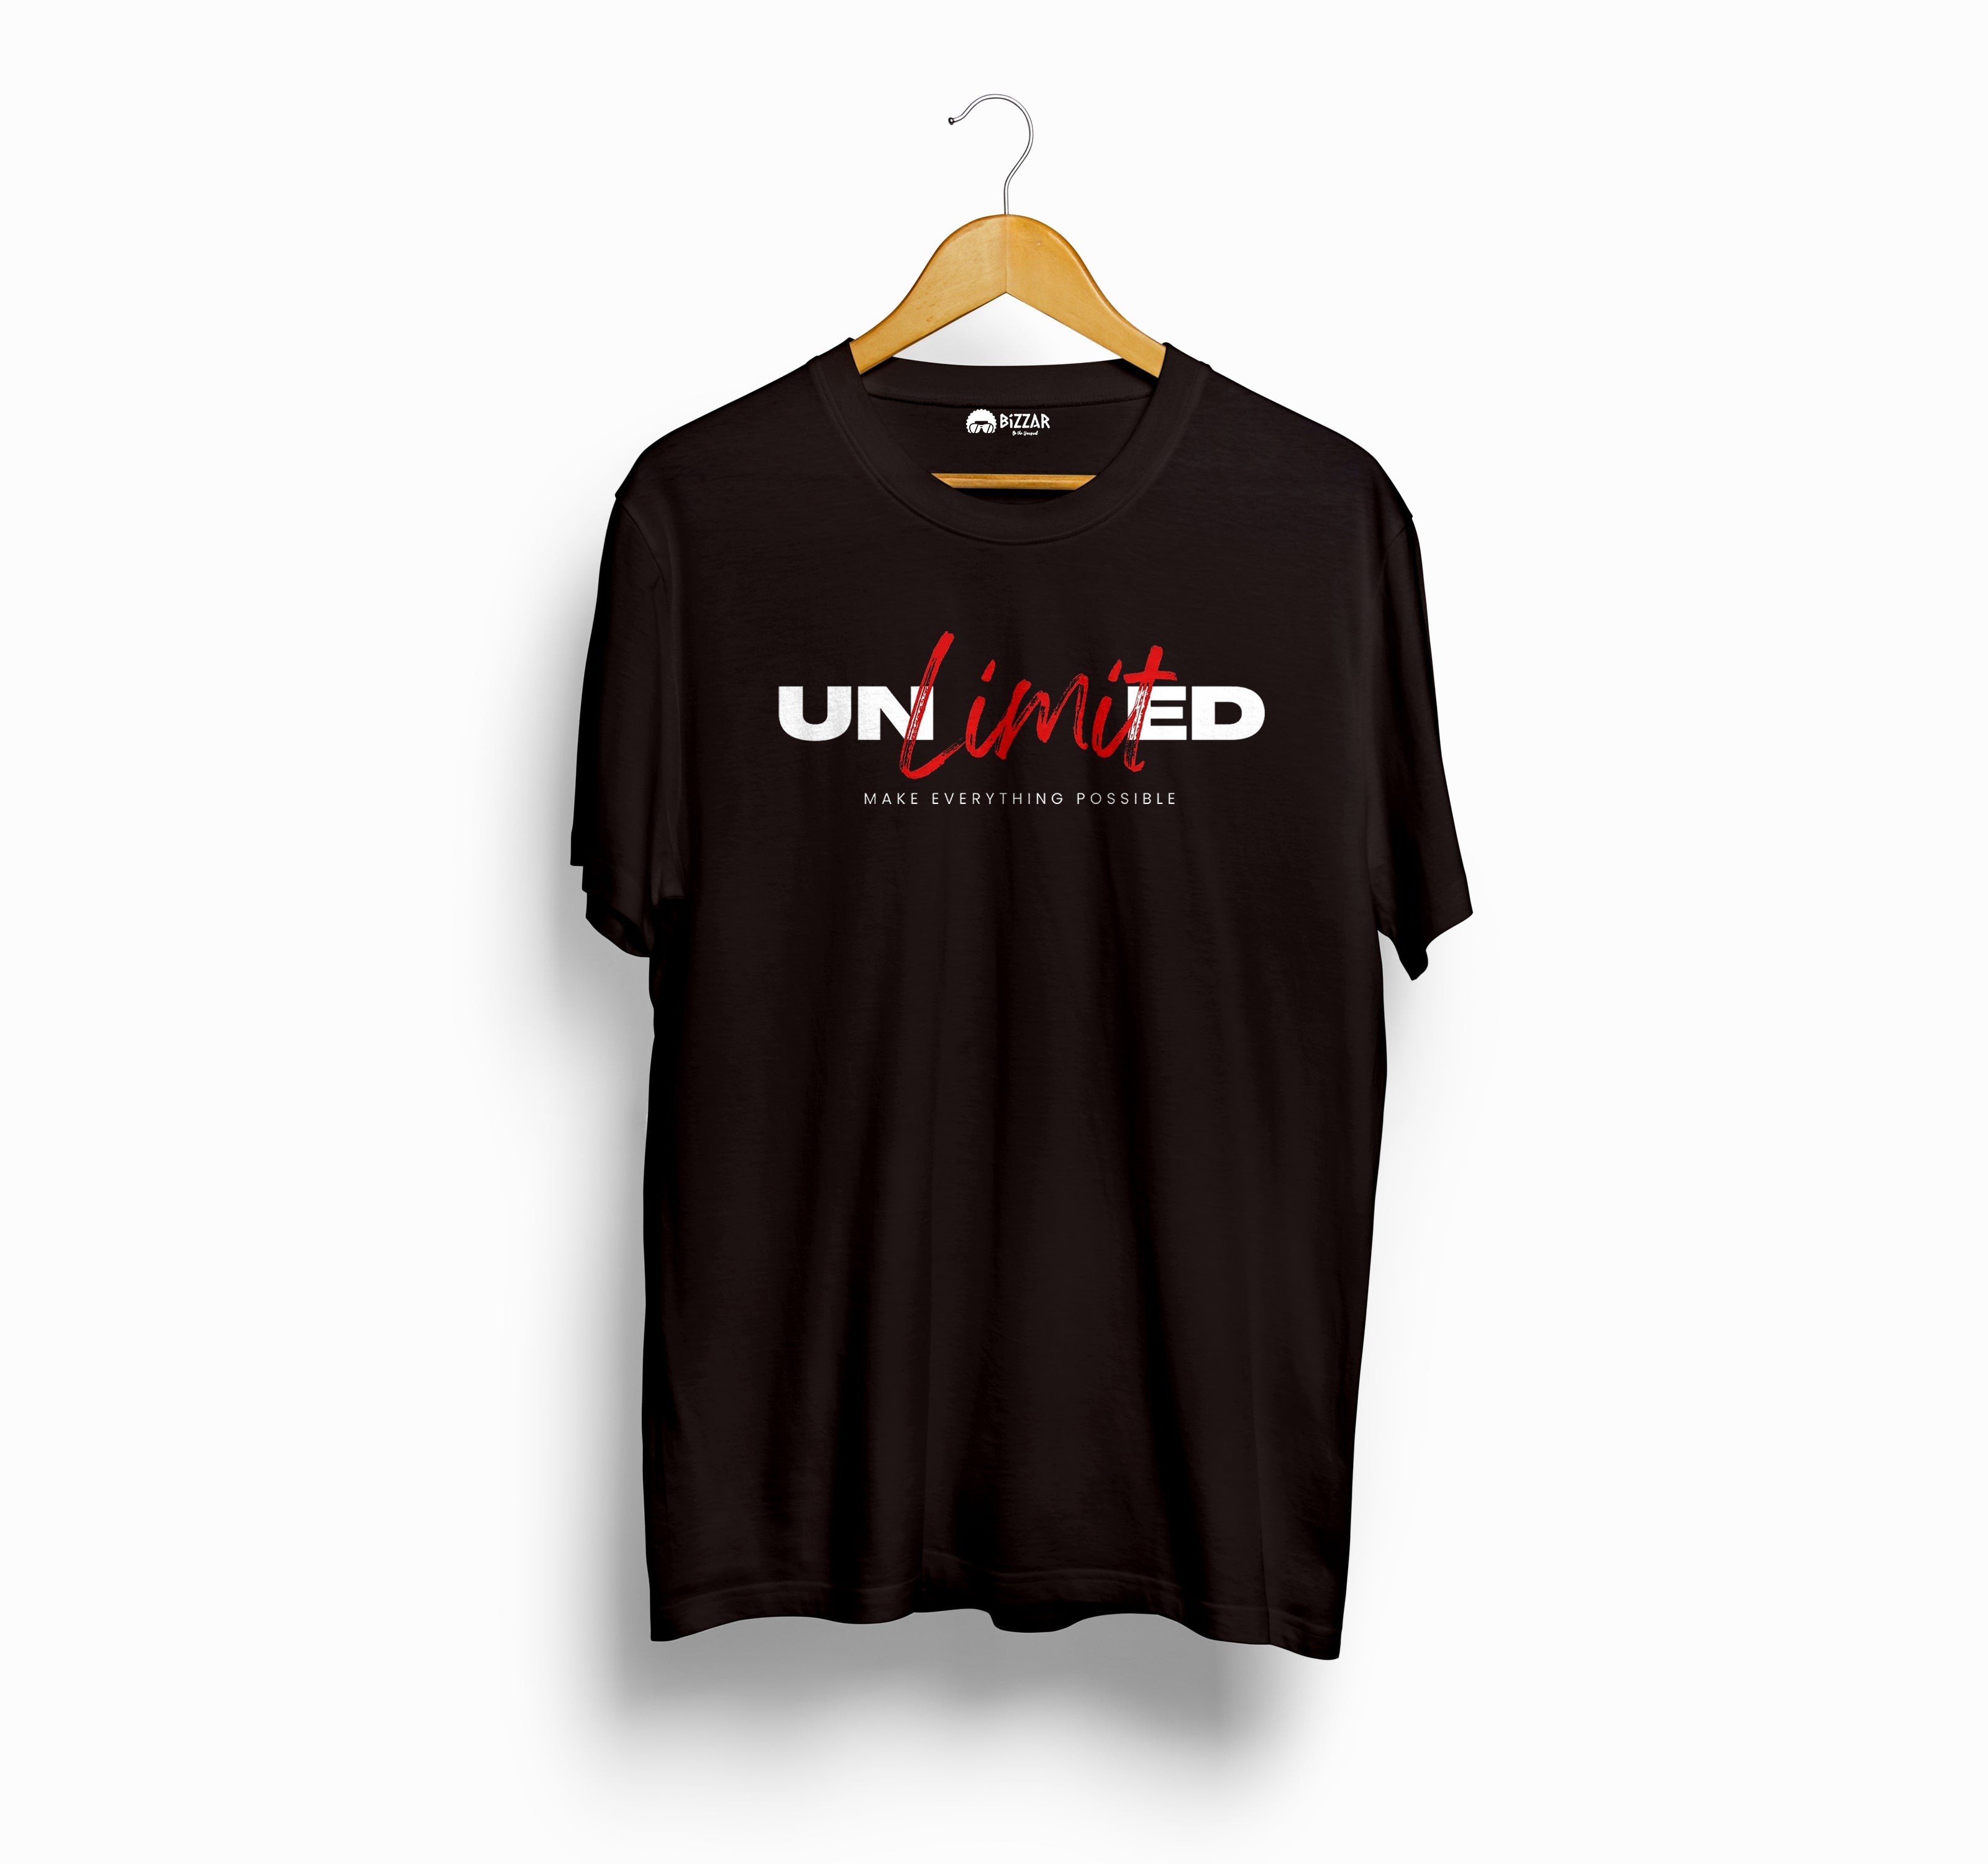 Bizzar's Unlimited Coffee Brown T-Shirt